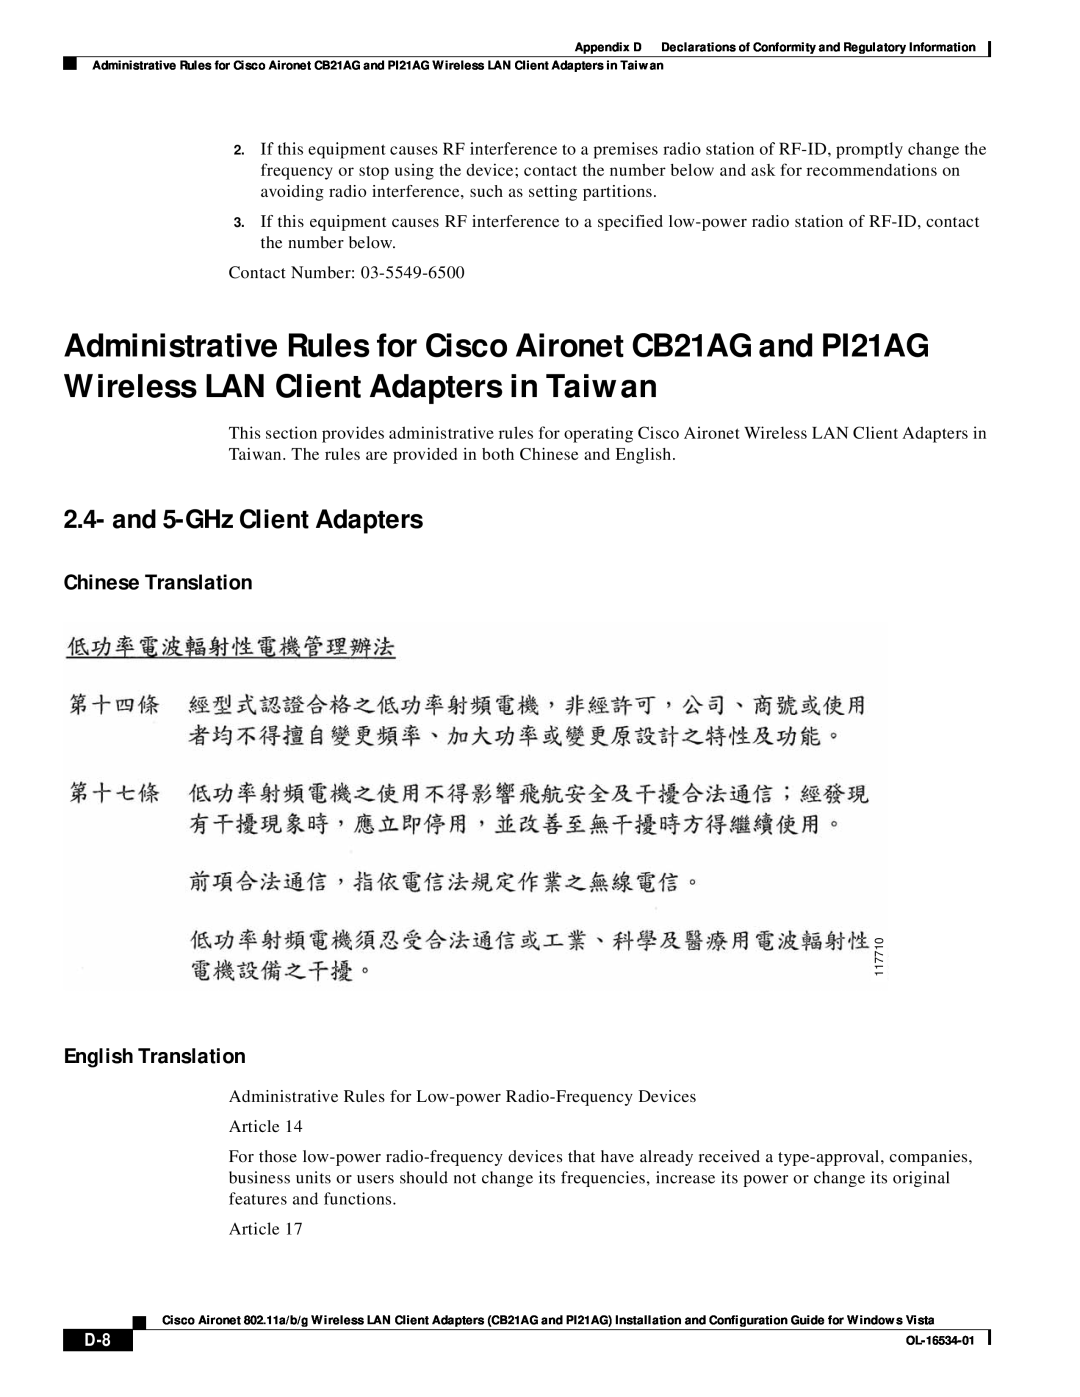 Cisco Systems PI21AG, CB21AG manual and 5-GHz Client Adapters, Chinese Translation, English Translation 